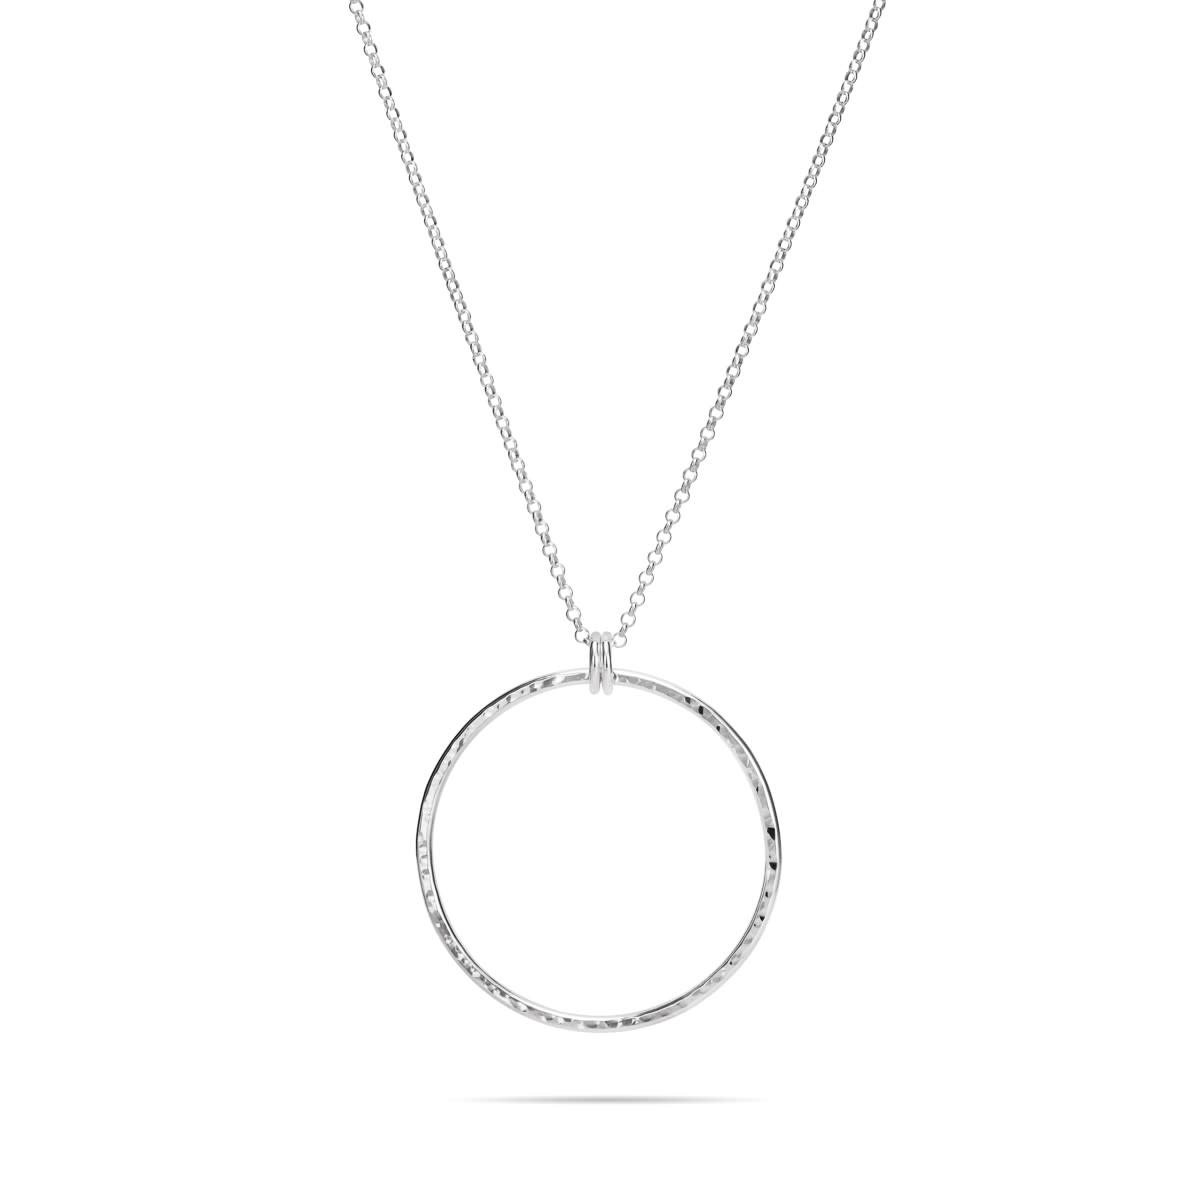 Mikel Grant Jewelry Hammered Minimalist Necklace